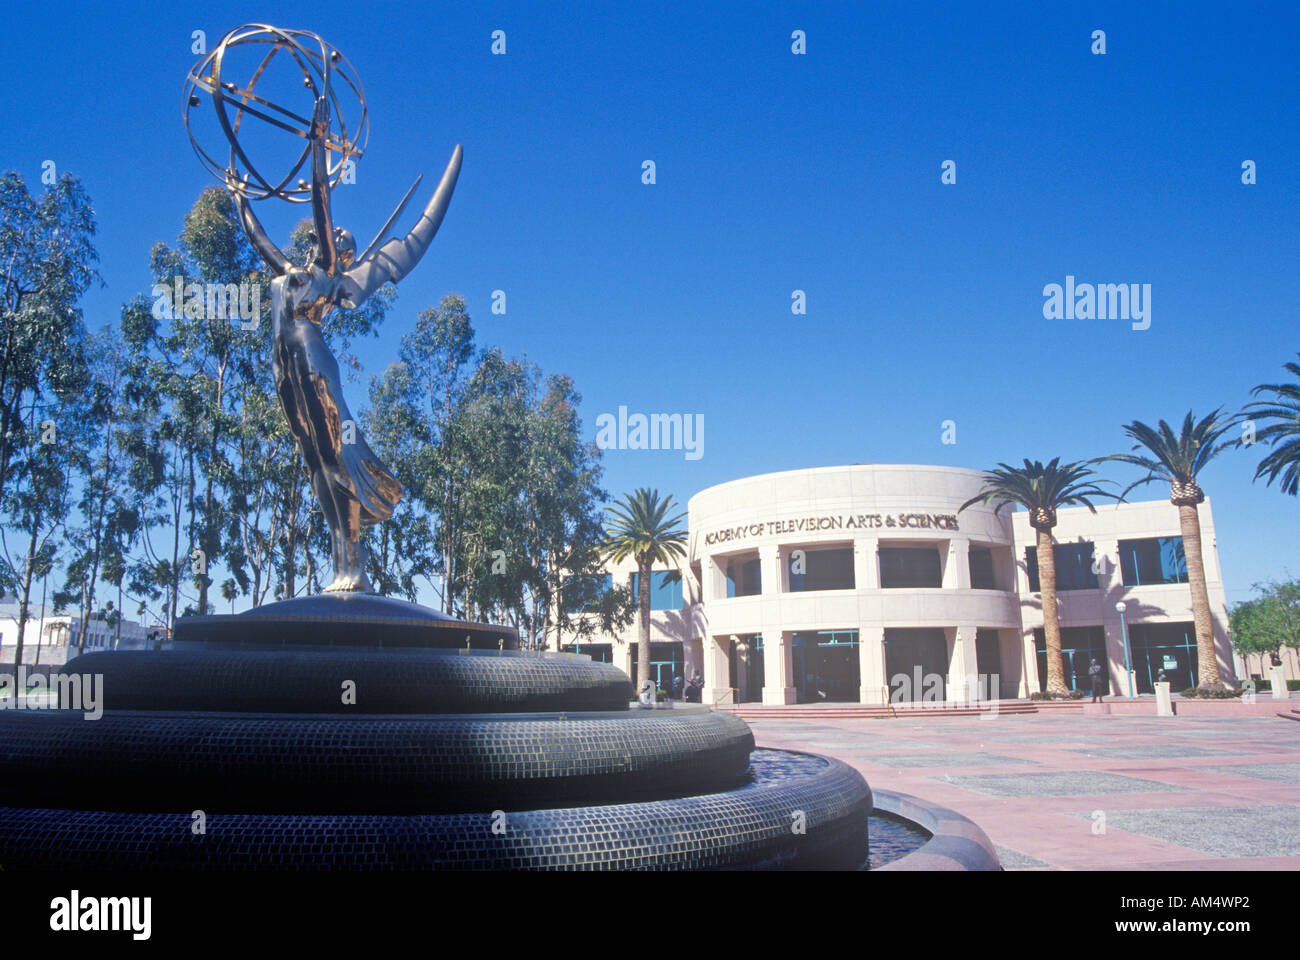 Academy Of Television Arts Science building in Los Angeles California Stock Photo